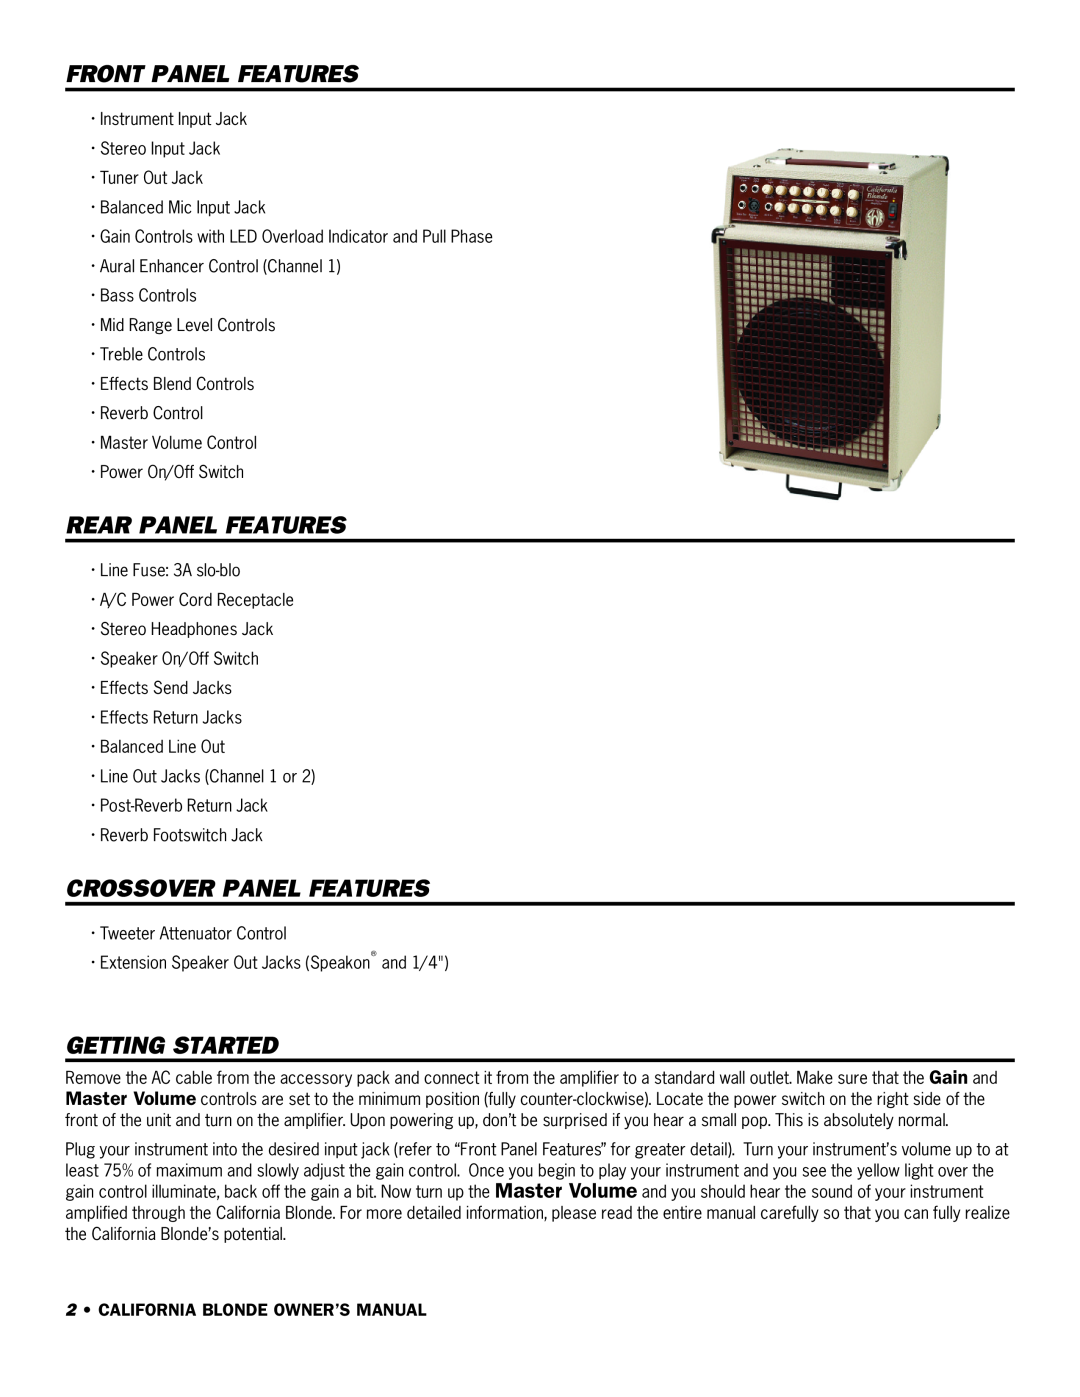 SWR Sound California Blonde Front Panel Features, Rear Panel Features, Crossover Panel Features, Getting Started 